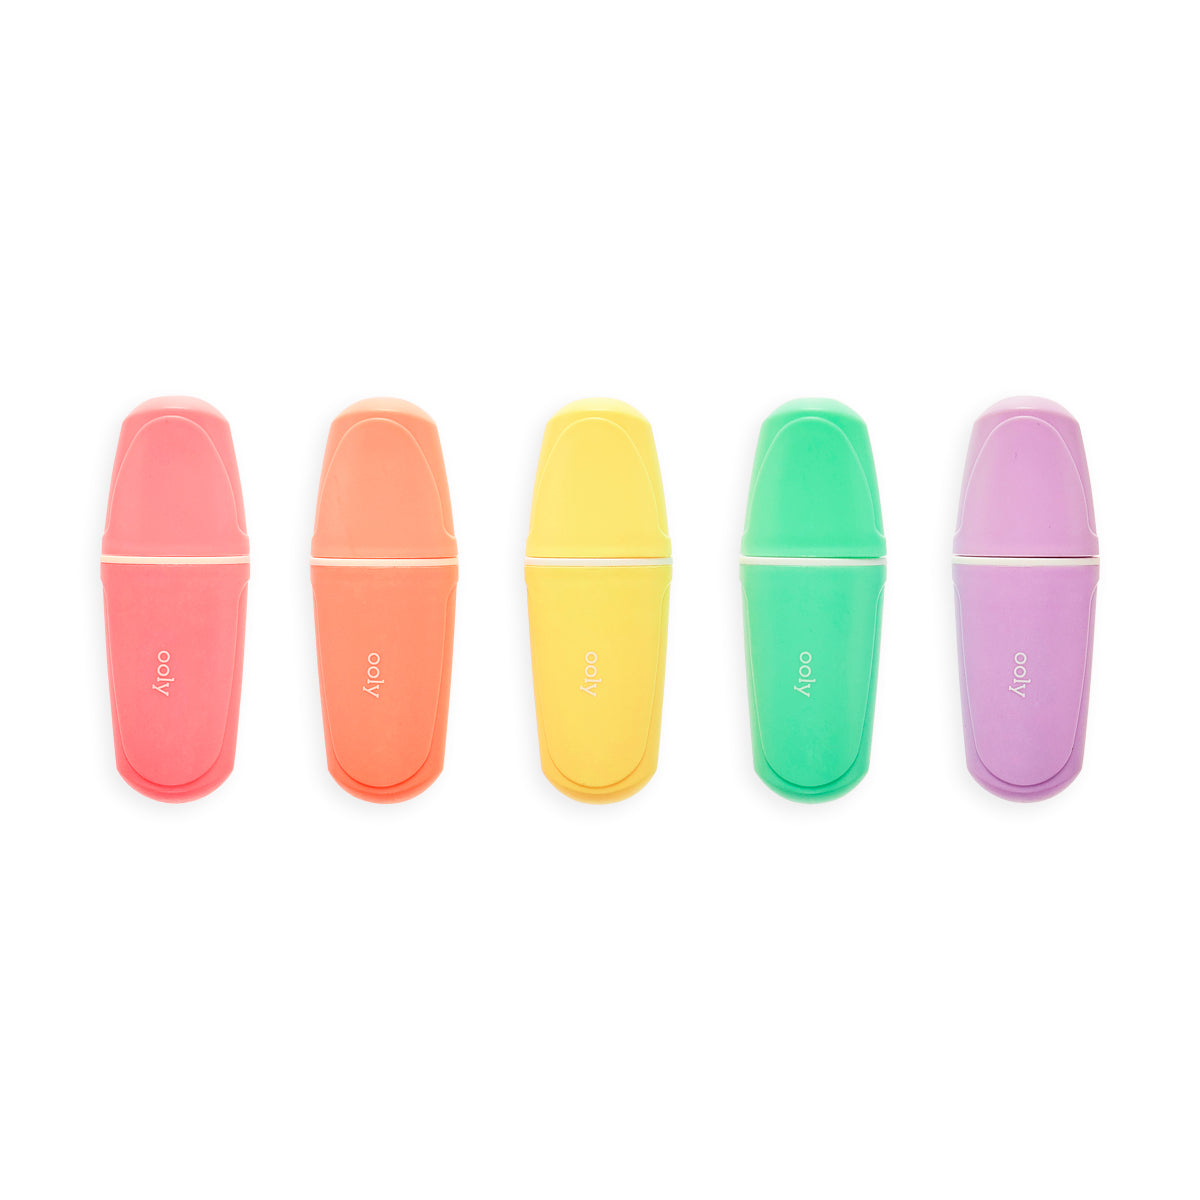 Le BonBon Patisserie Scented Pastel Highlighters - Set of 5